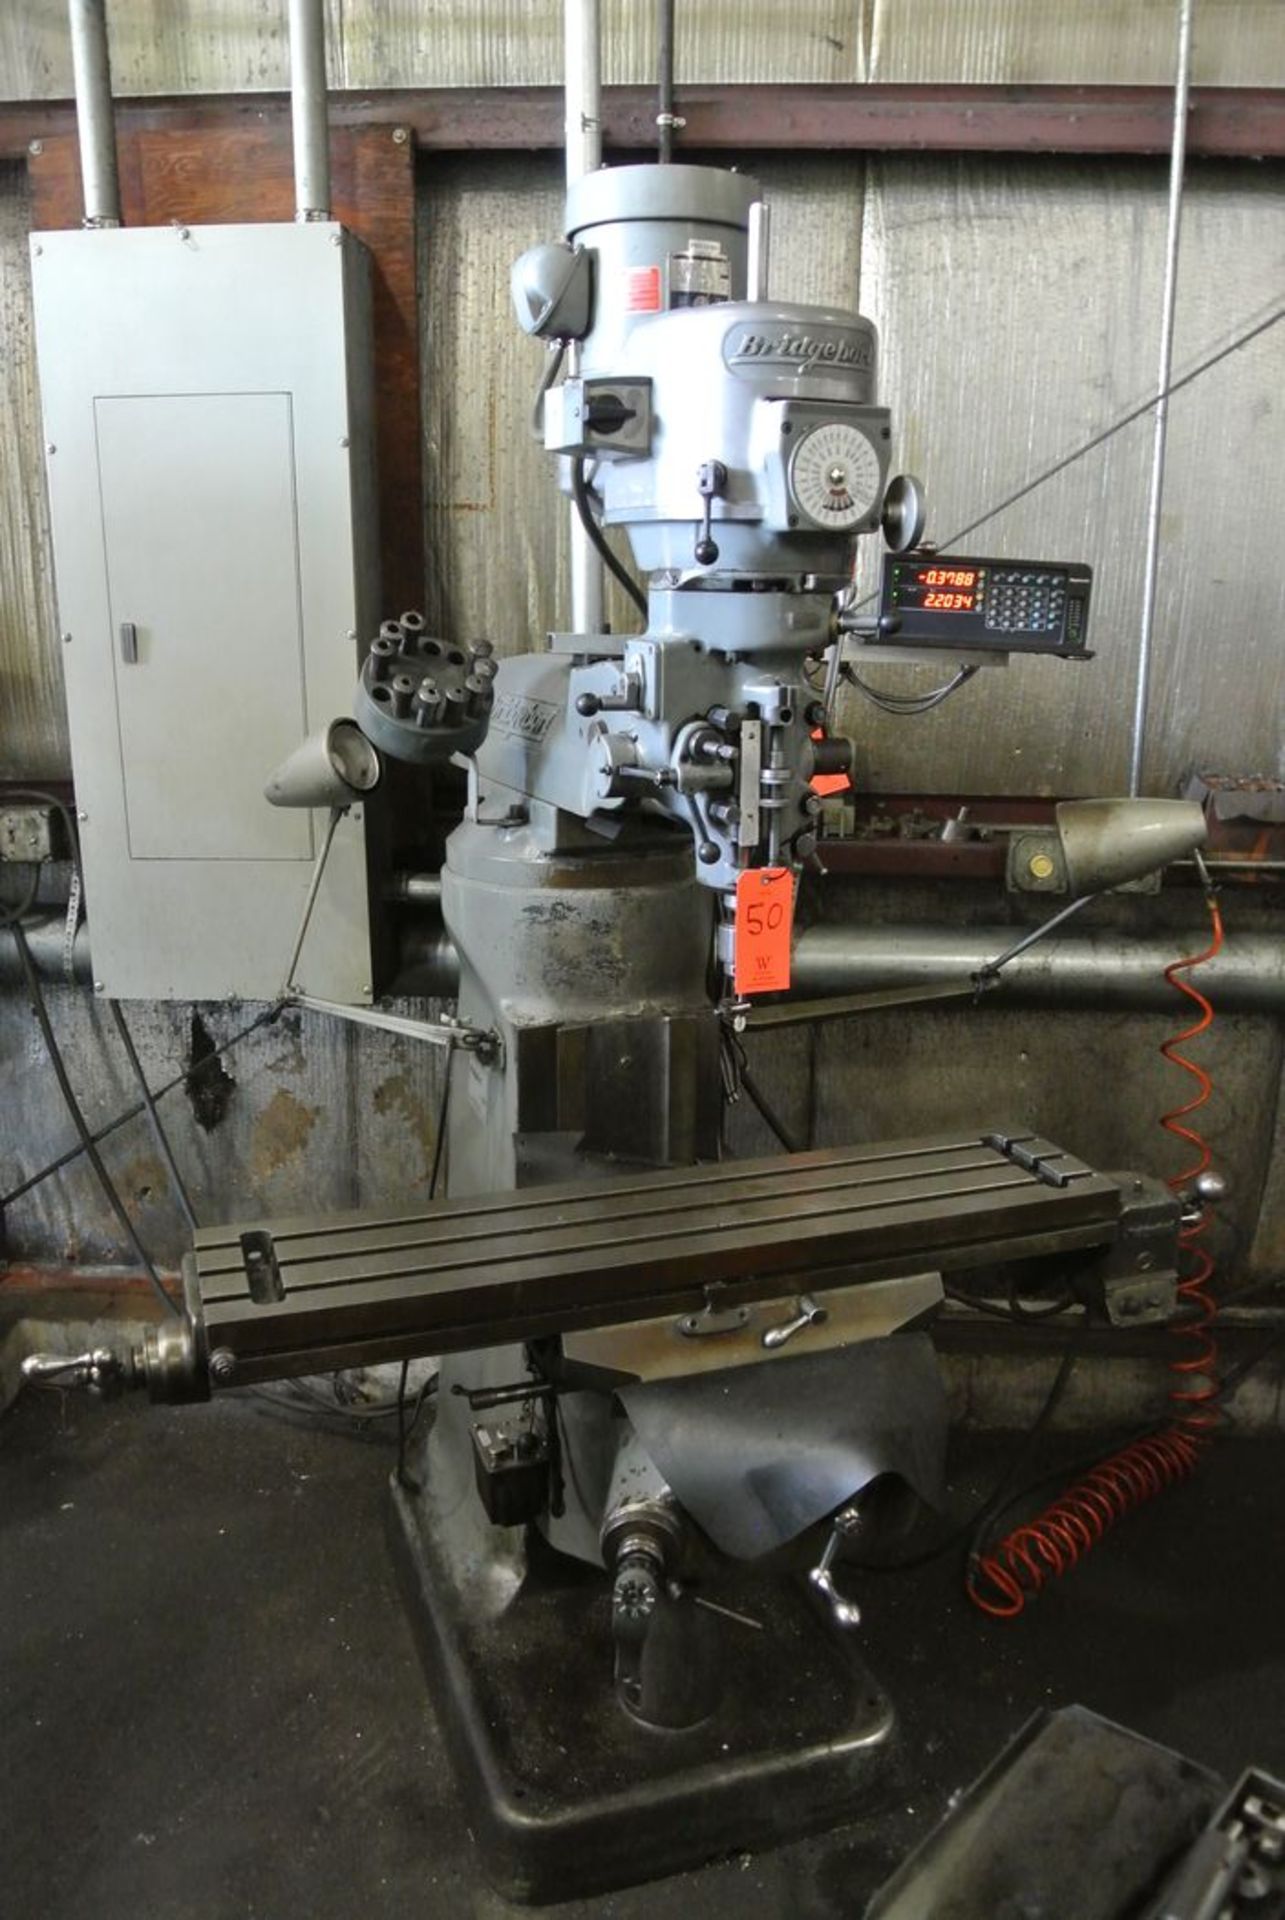 Bridgeport 1-1/2 HP Vertical Milling Machine, S/N: 12BR163788; with 42 in. x 9 in. T-Slot Production